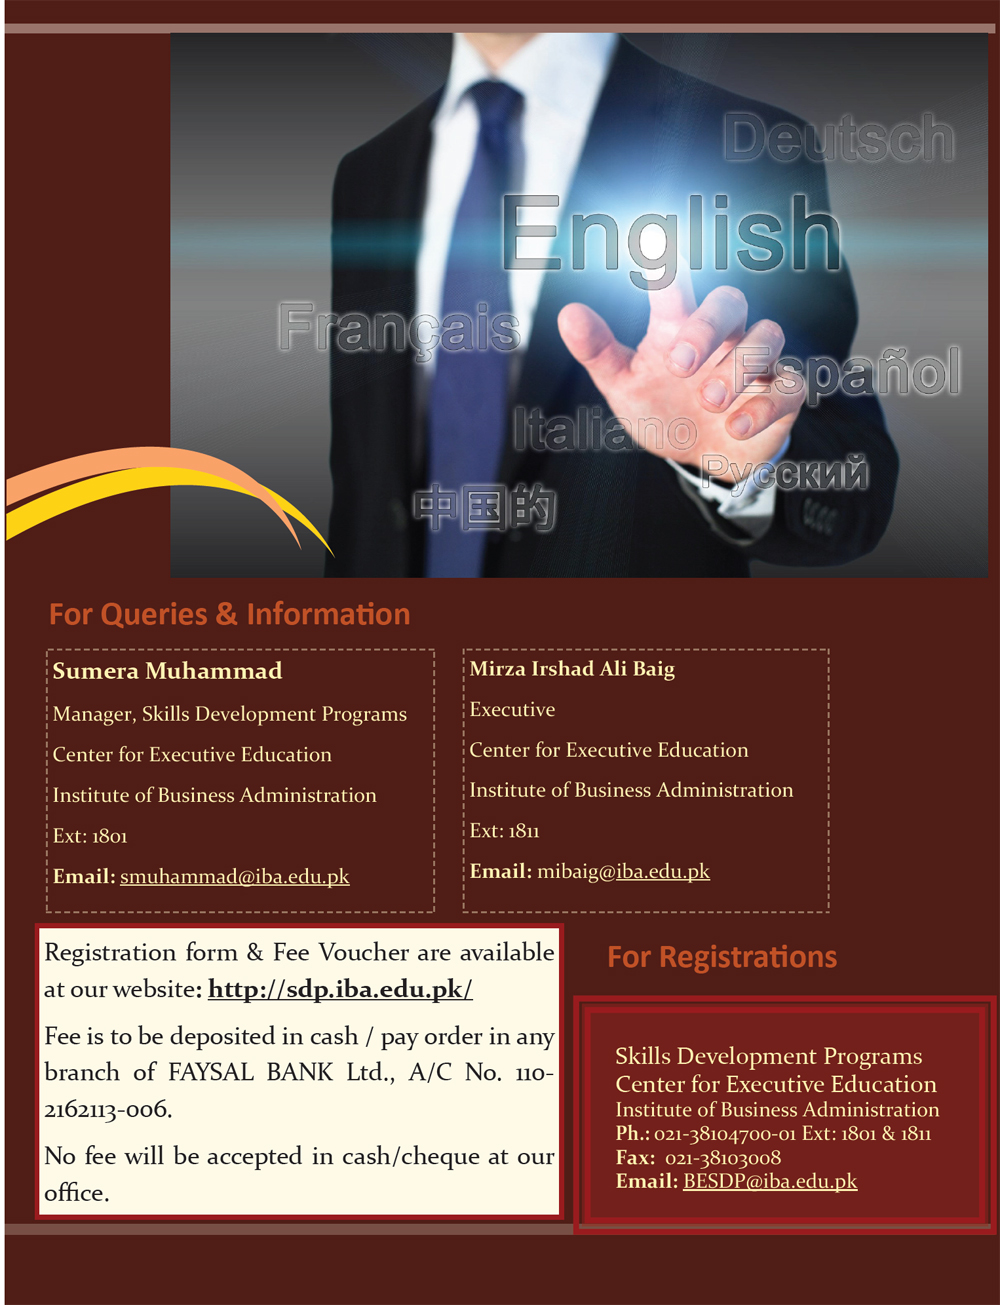 Business English for Networking